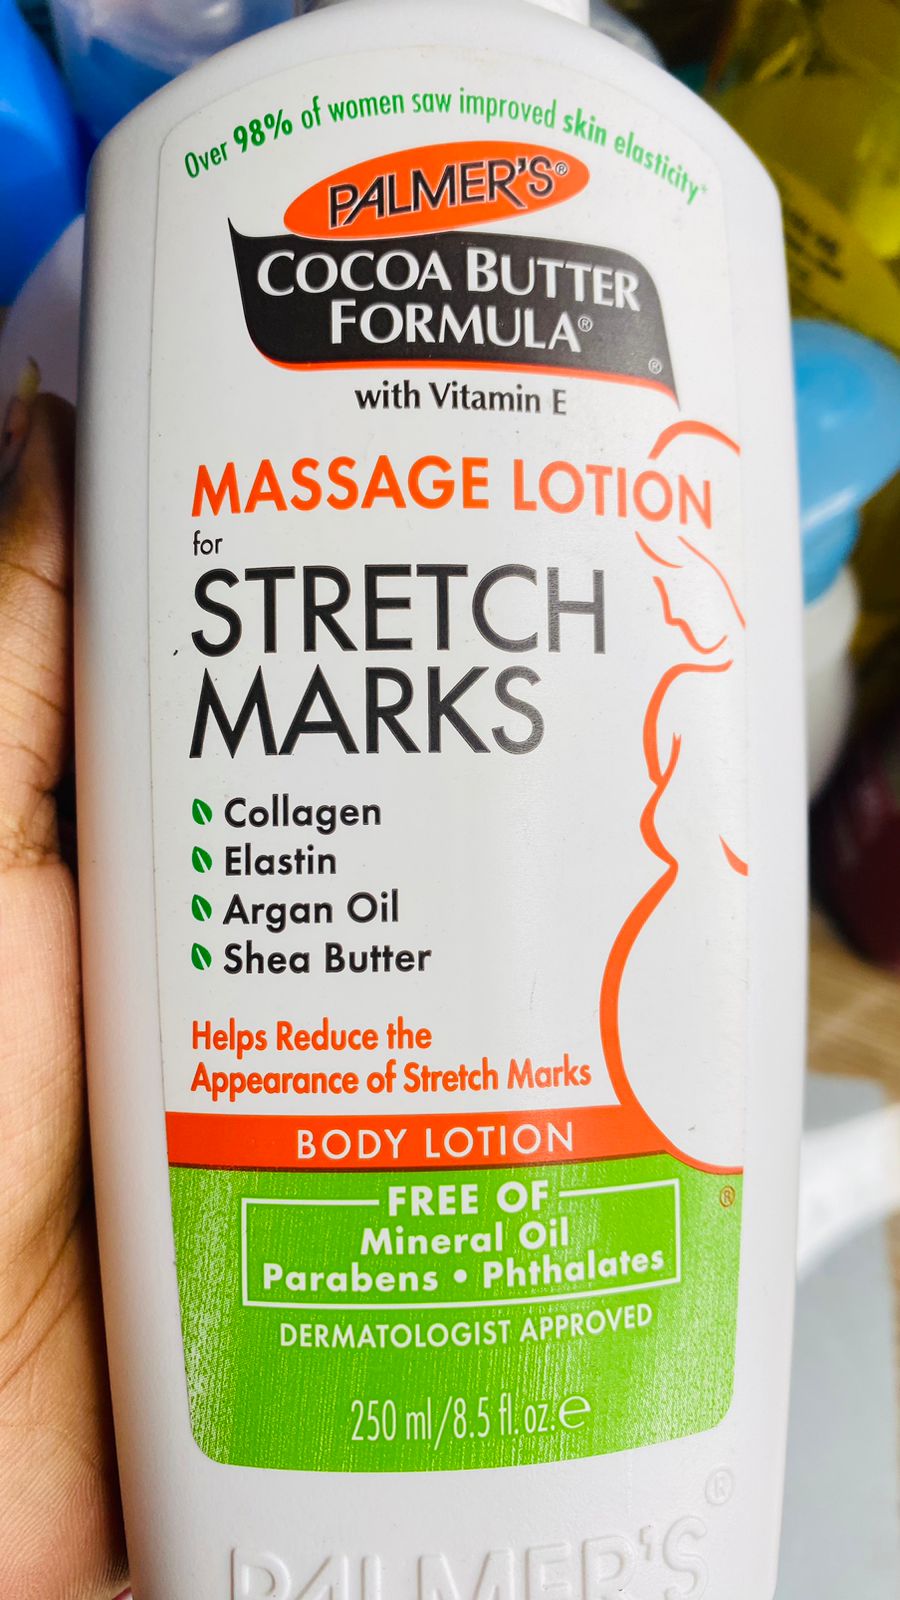 Palmer's Cocoa Butter Formula Stretch Marks Massage Lotion